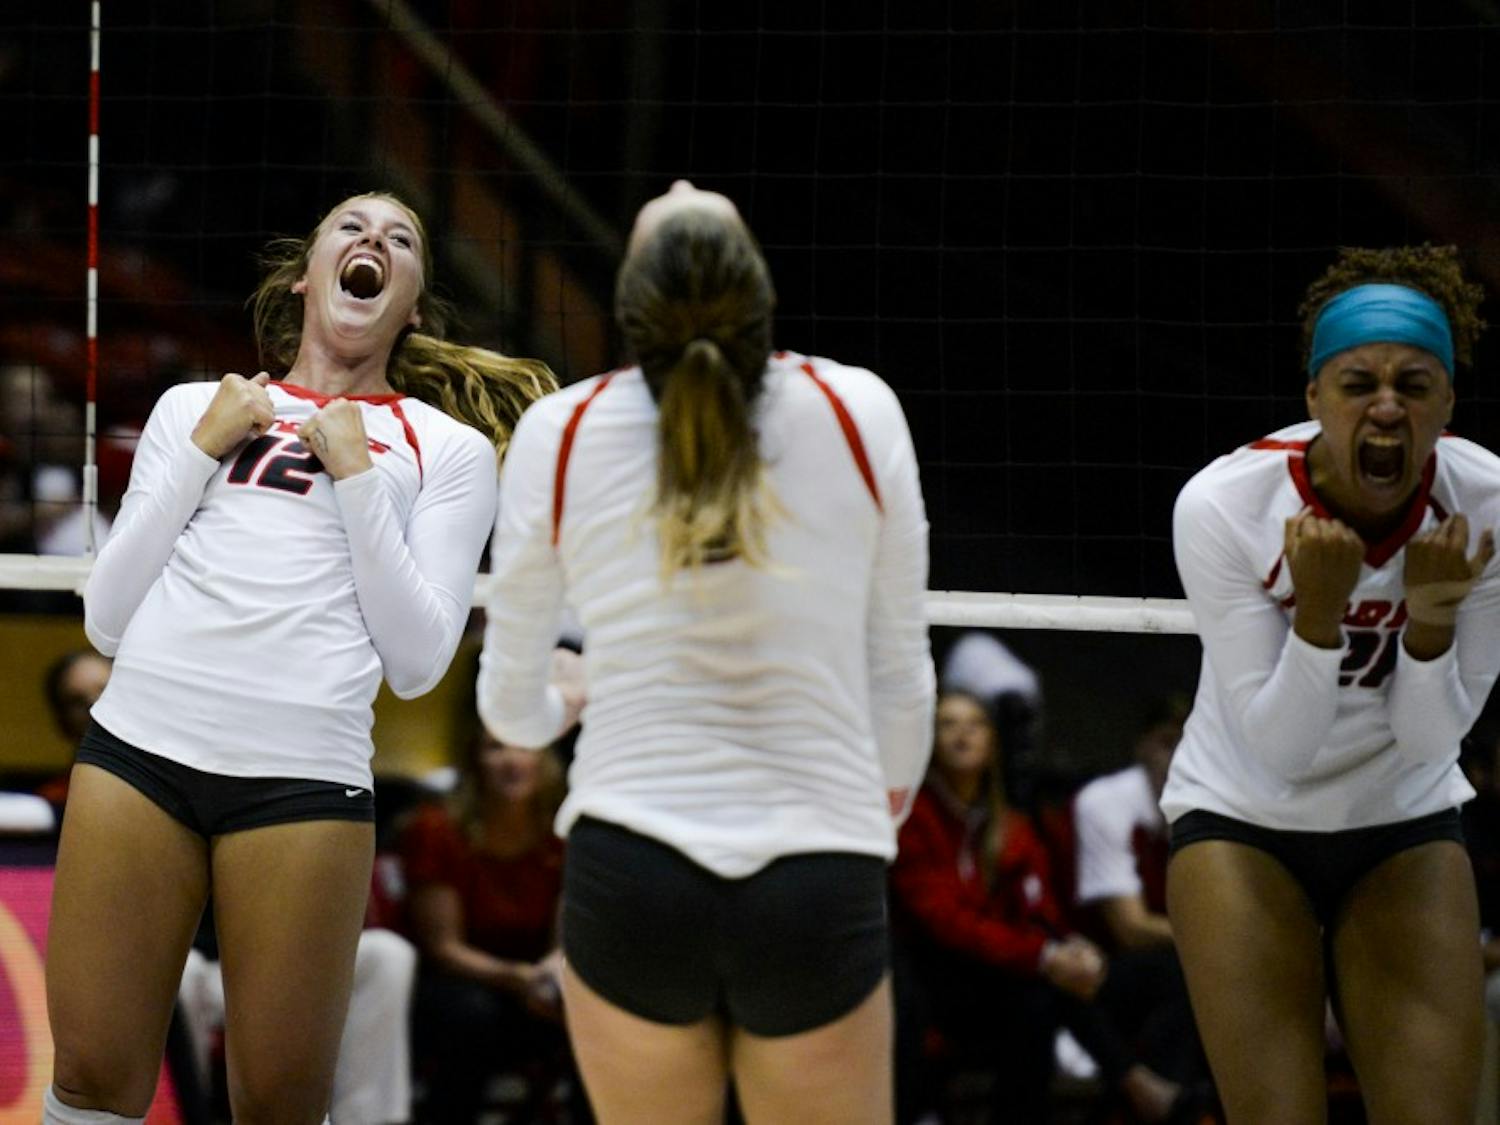 Senior outside hitter Cassie House, 12, celebrates with teammates after scoring against Nebraska on Saturday, Sept. 10, 2016 at WisePies Arena. UNM won three out of its four games this weekend at the UT Arlington Invitational.